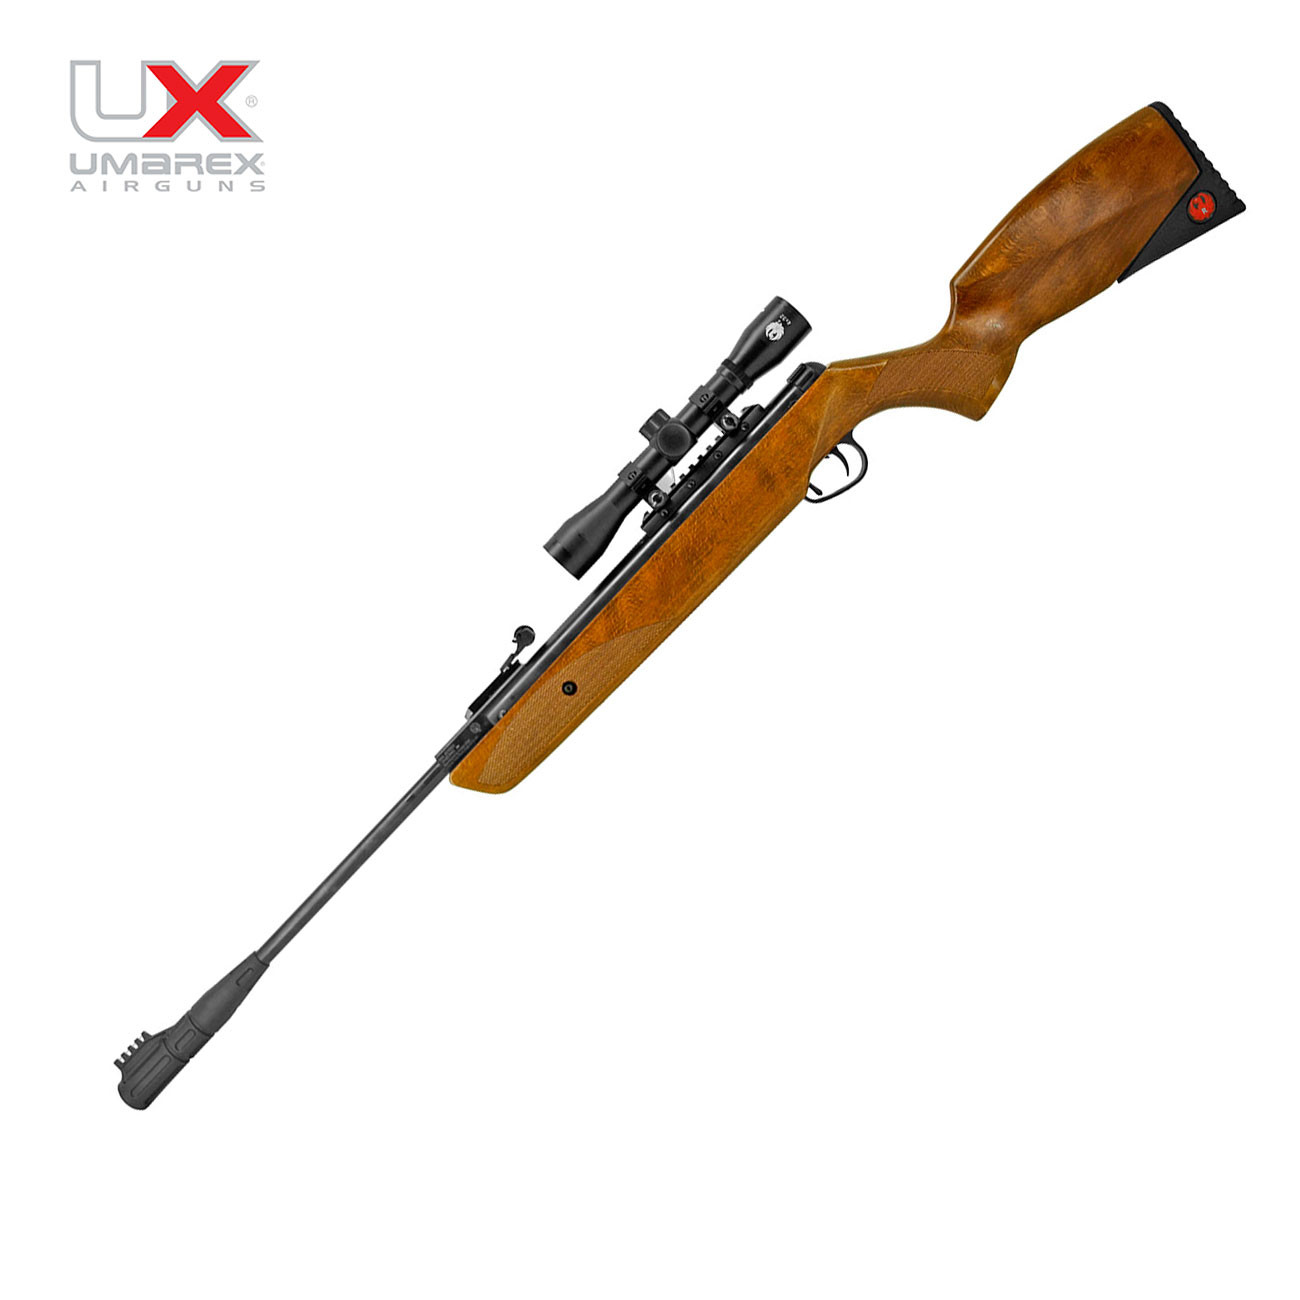 Ruger Impact Max 0.22 Pellet Gas Piston Air Rifle for sale online 